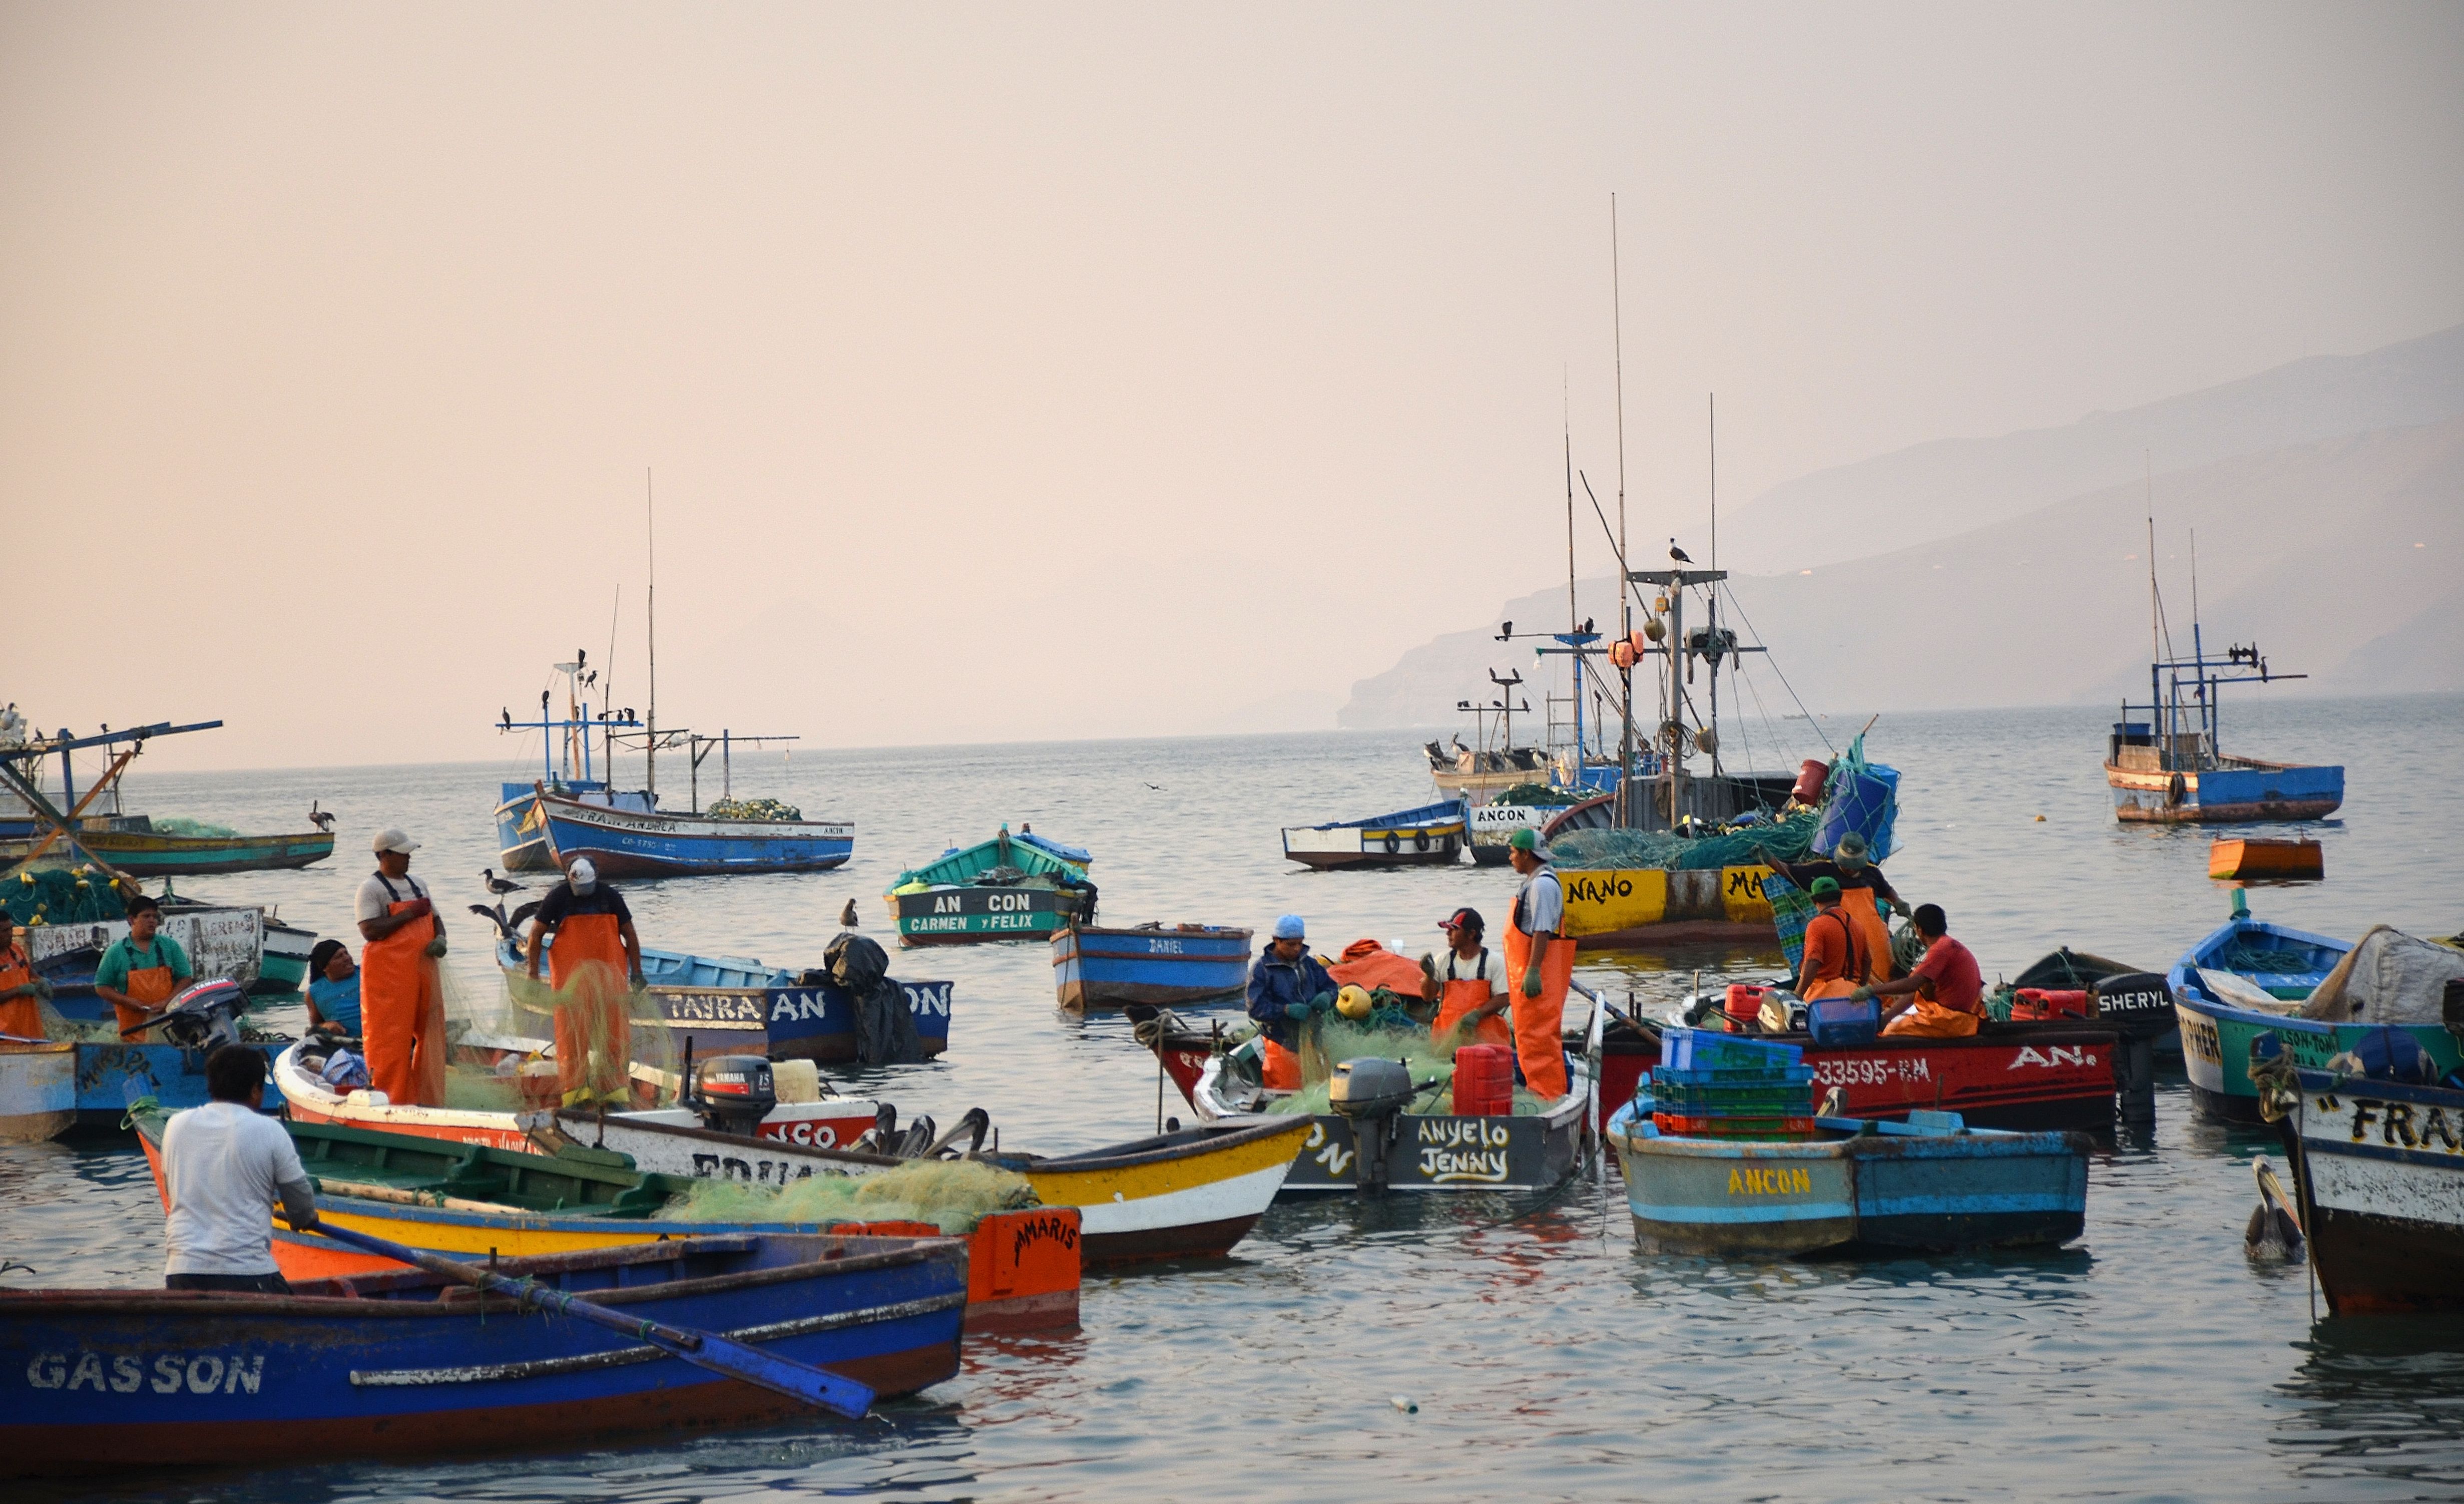 Several fishing boats gather in the harbor